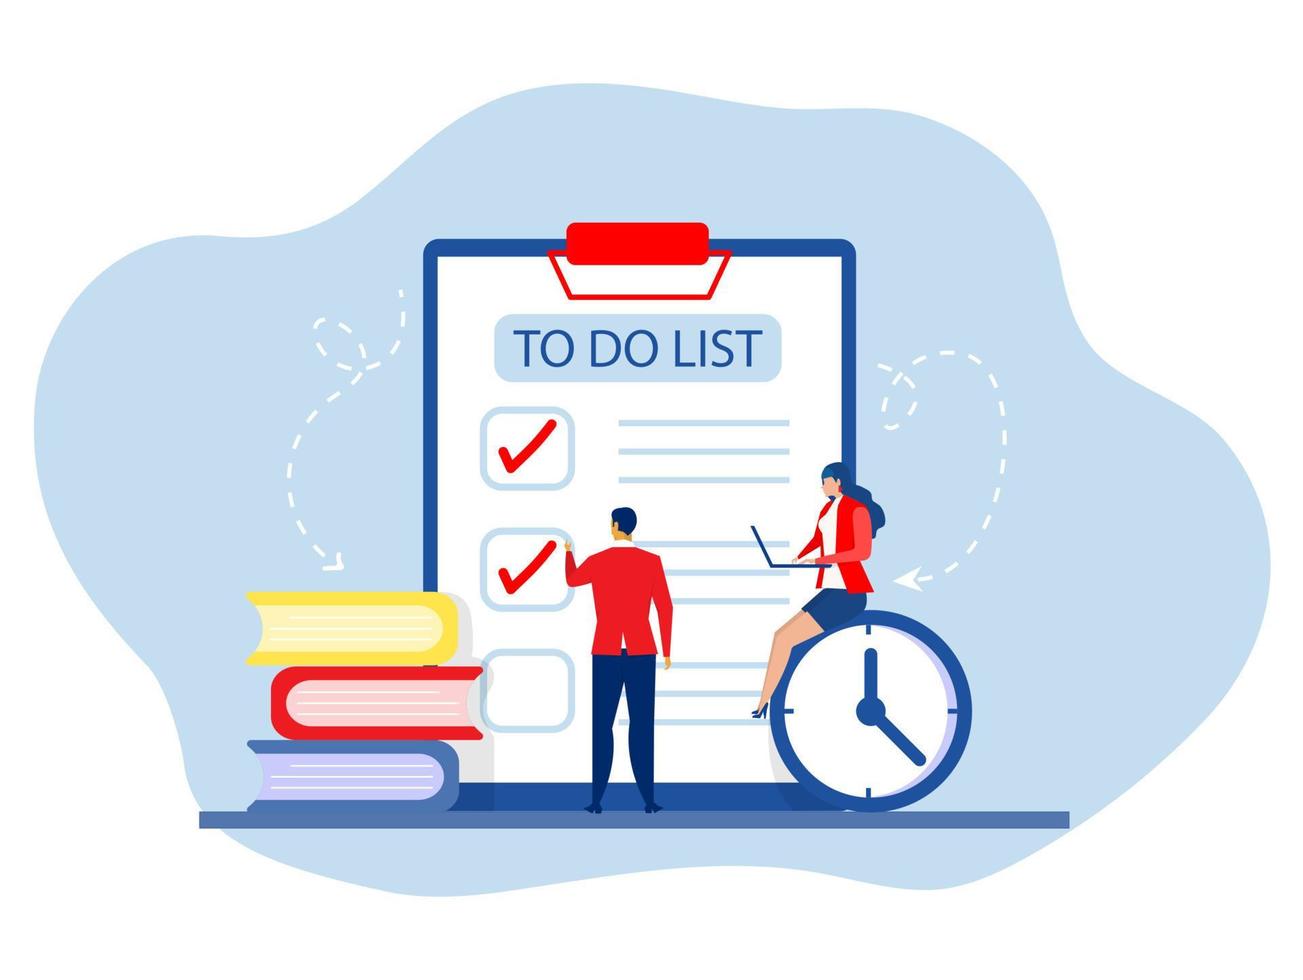 To do list , People do tasks and check schedules. people do tasks and check schedule. style vectors for posters, banners, websites, booklets vector illustration